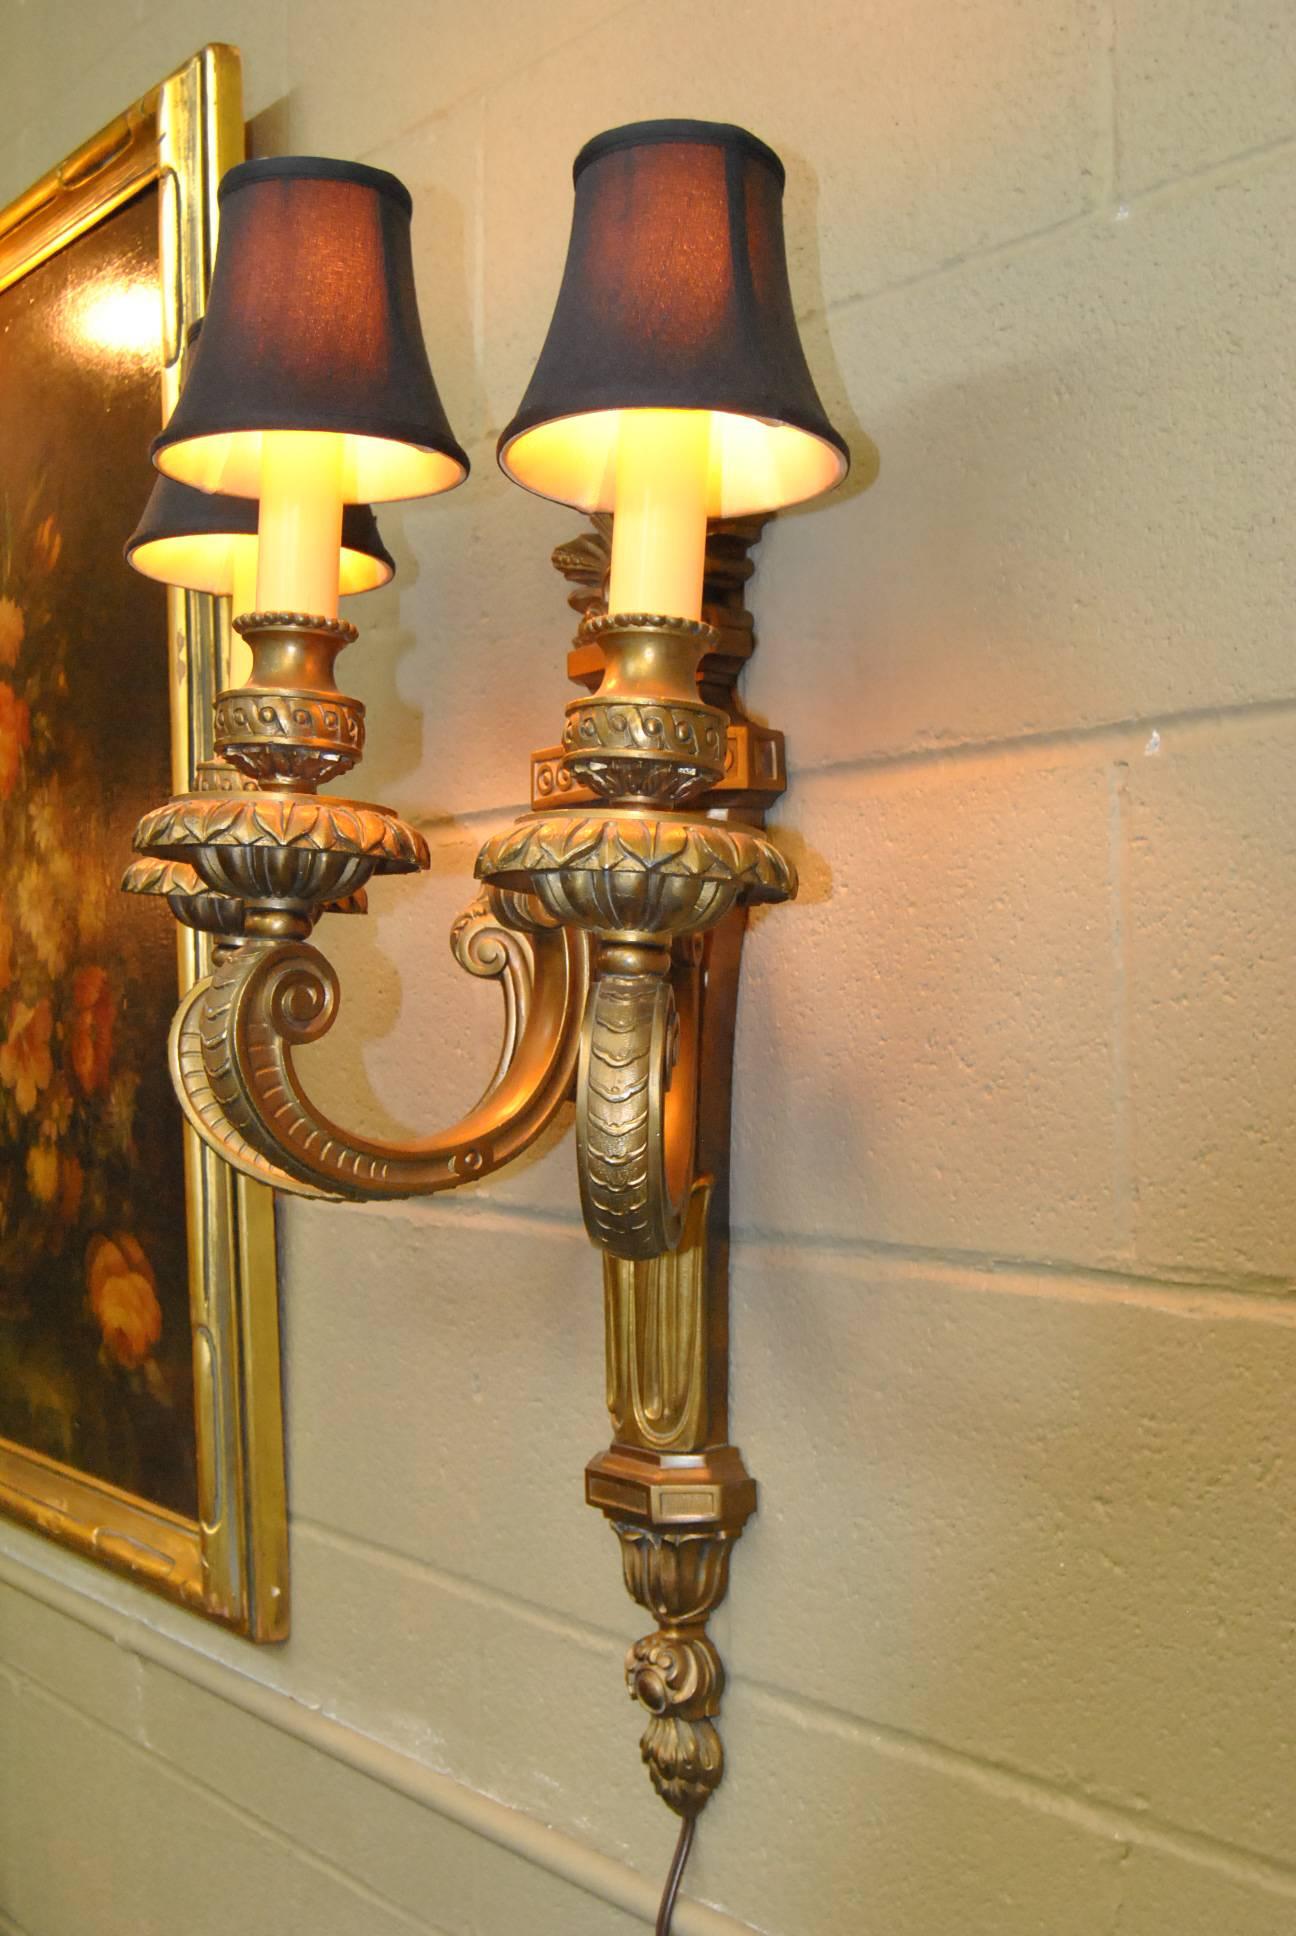 North American Ornate Doré Bronze Neoclassical Three-Arm Wall Sconce